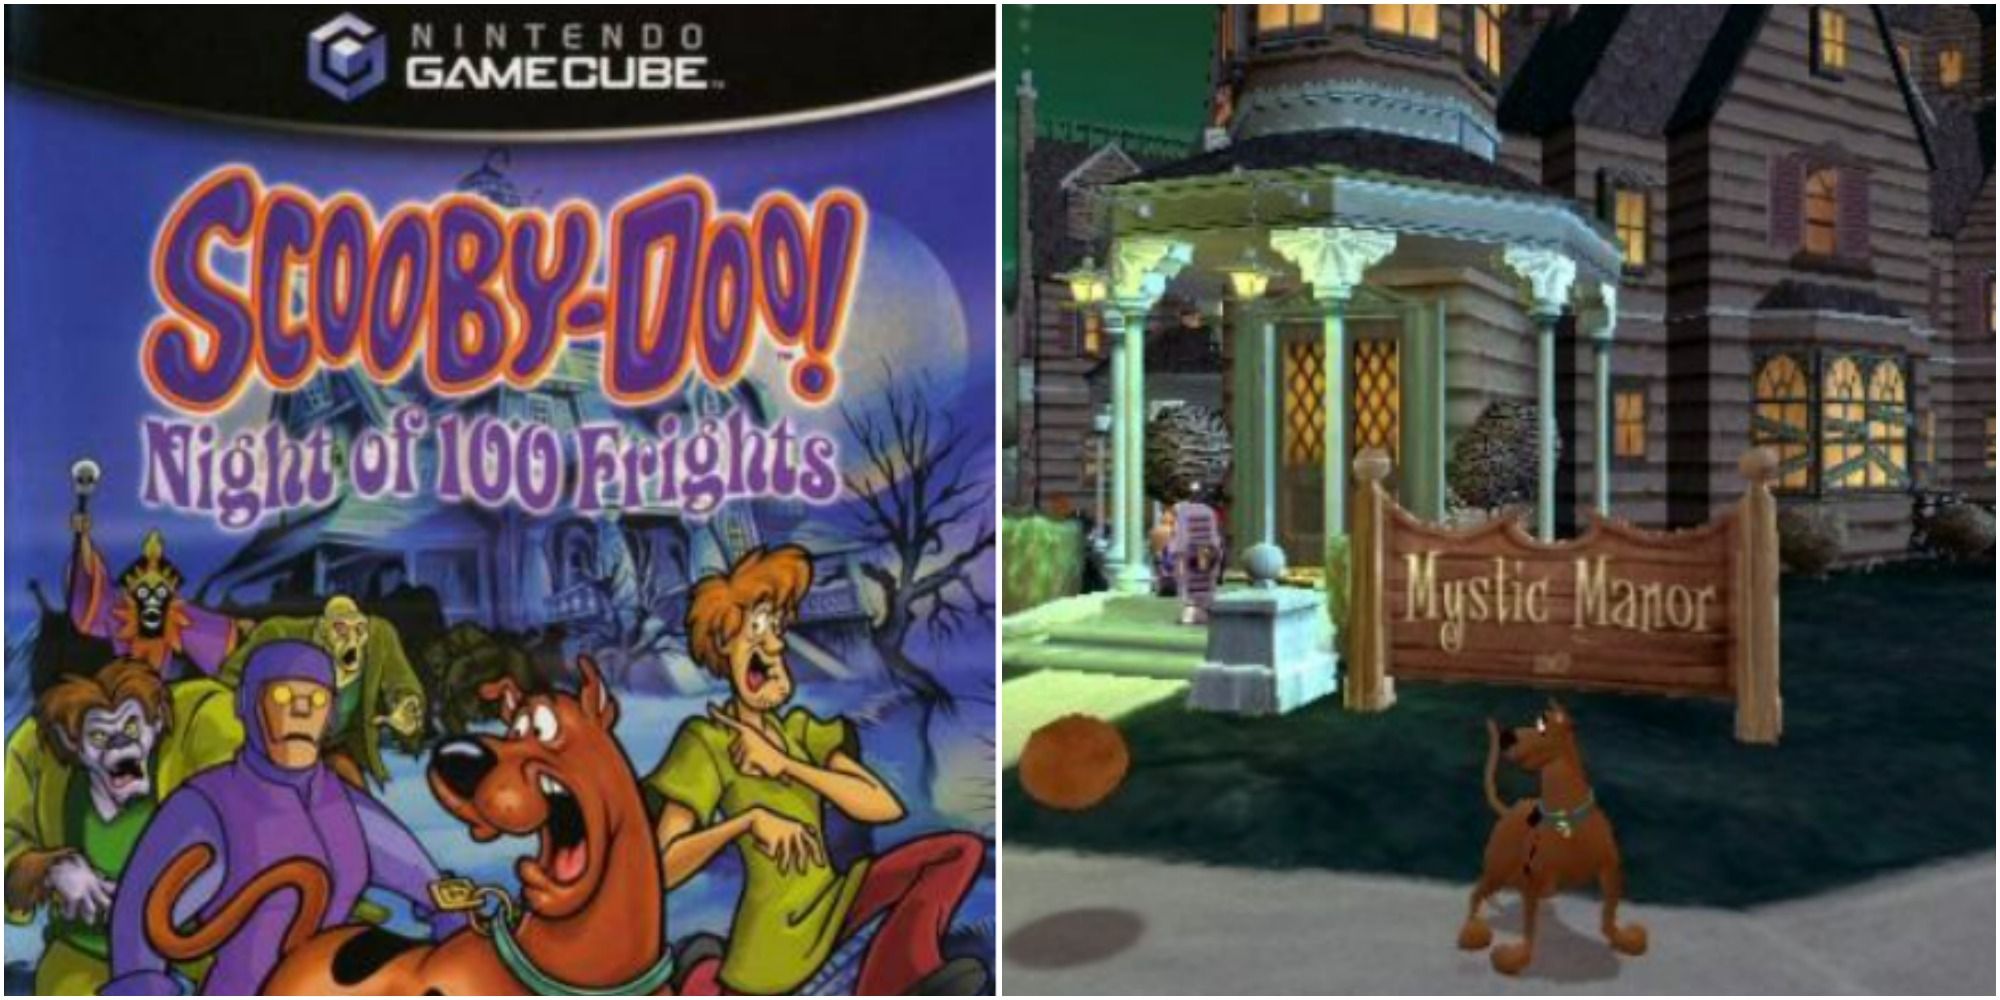 scooby doo night of 100 frights gamecube box art with scooby, shaggy, and monsters and scooby in front of mystic manor